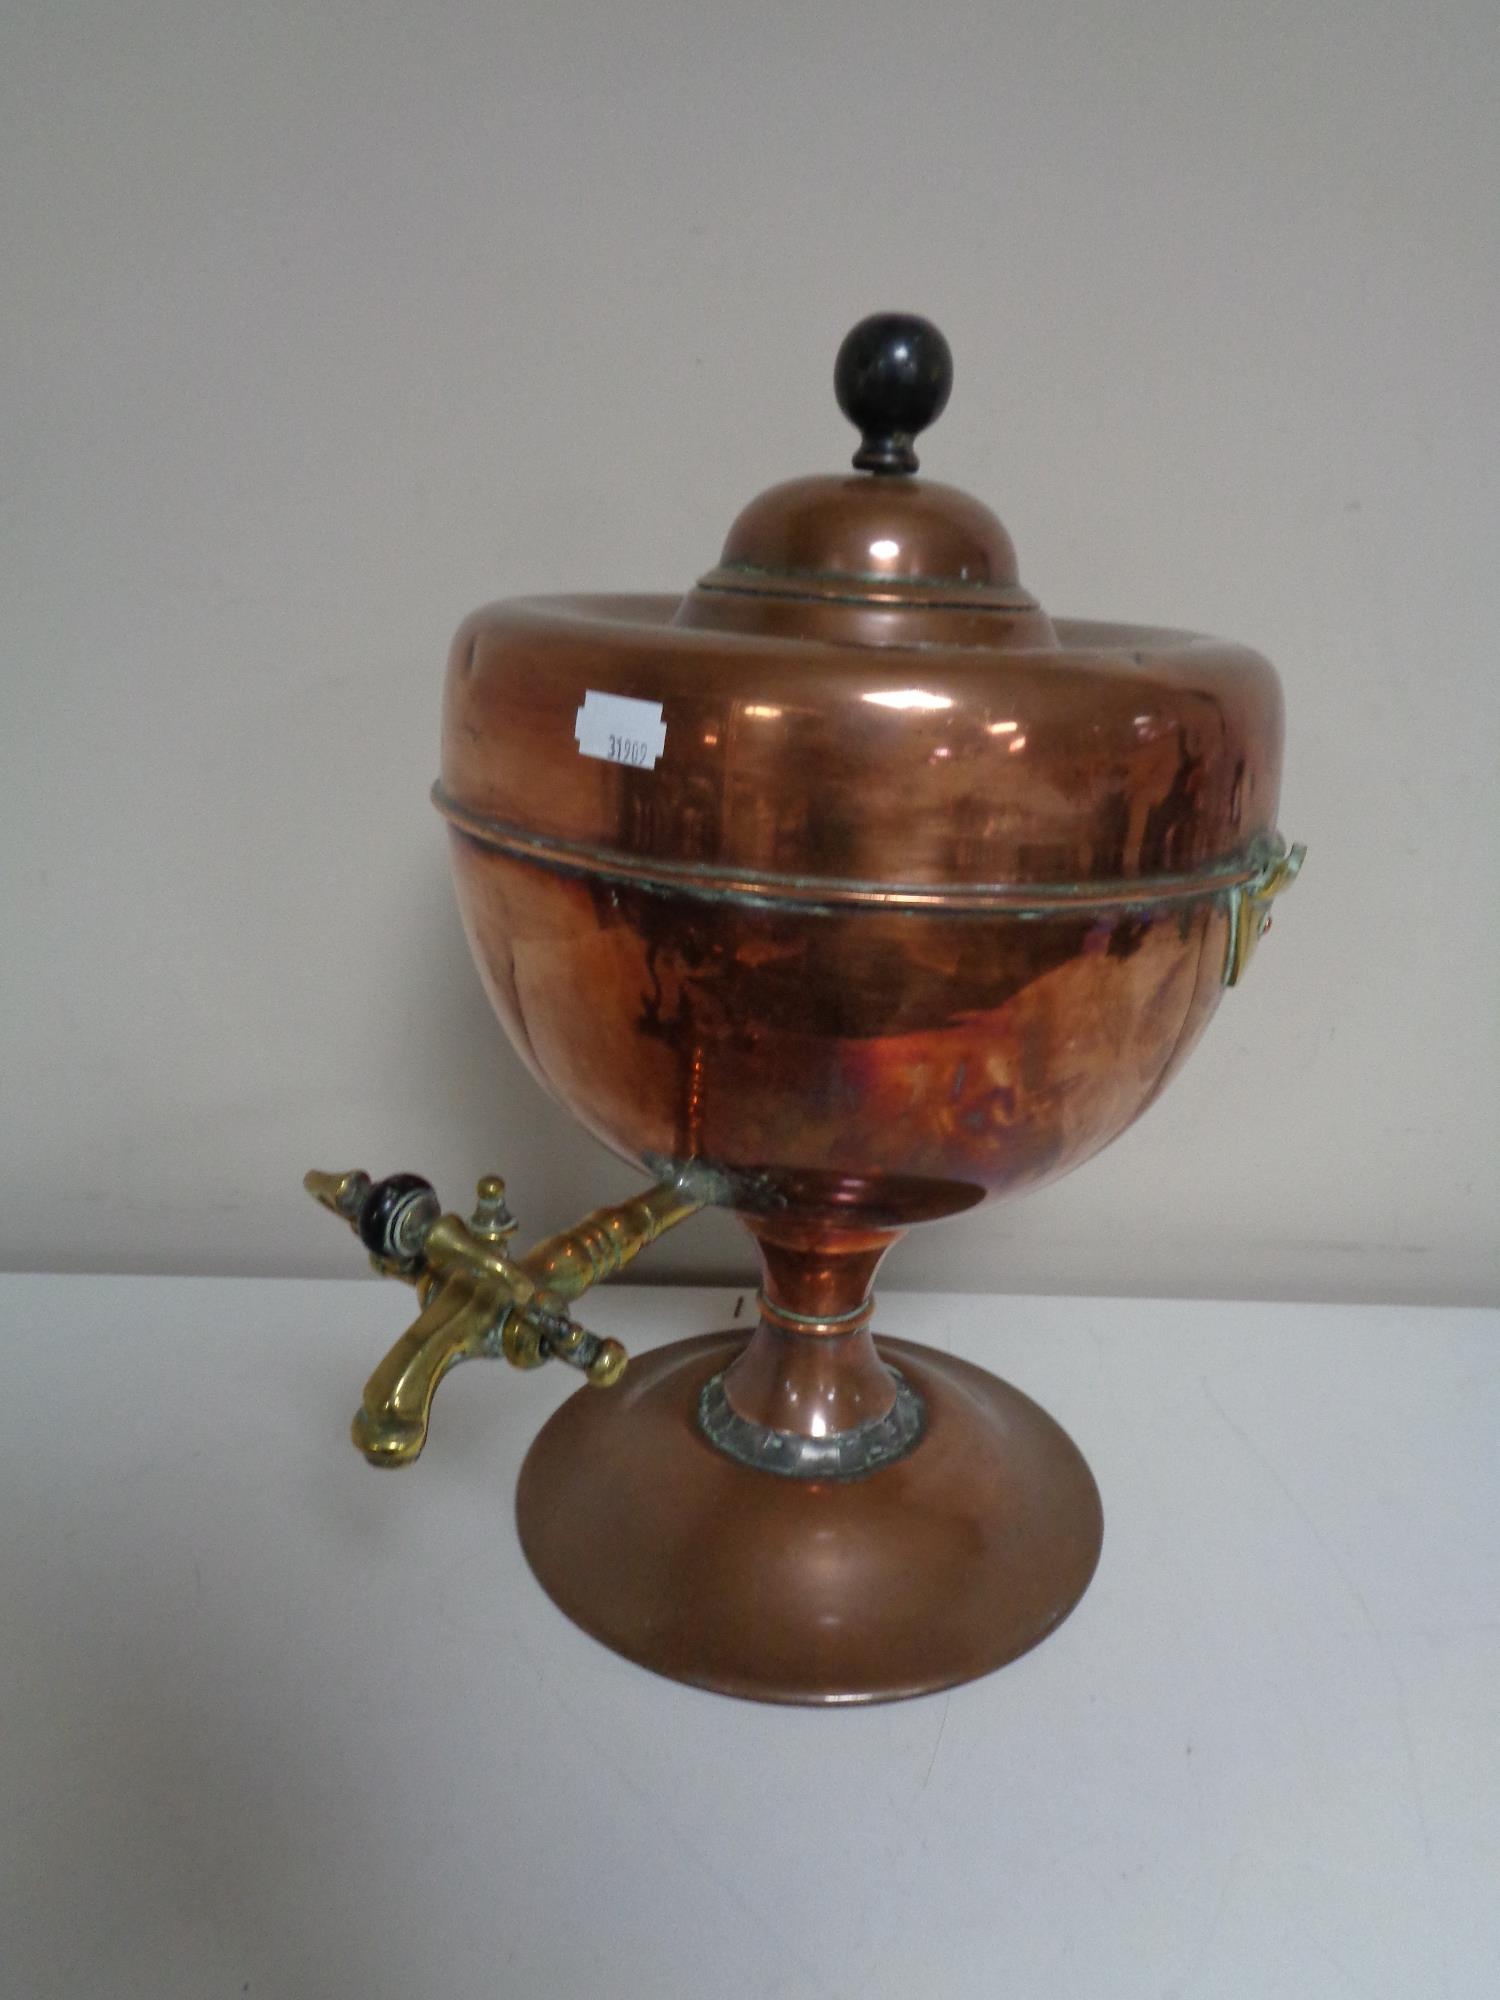 An antique copper and brass urn.